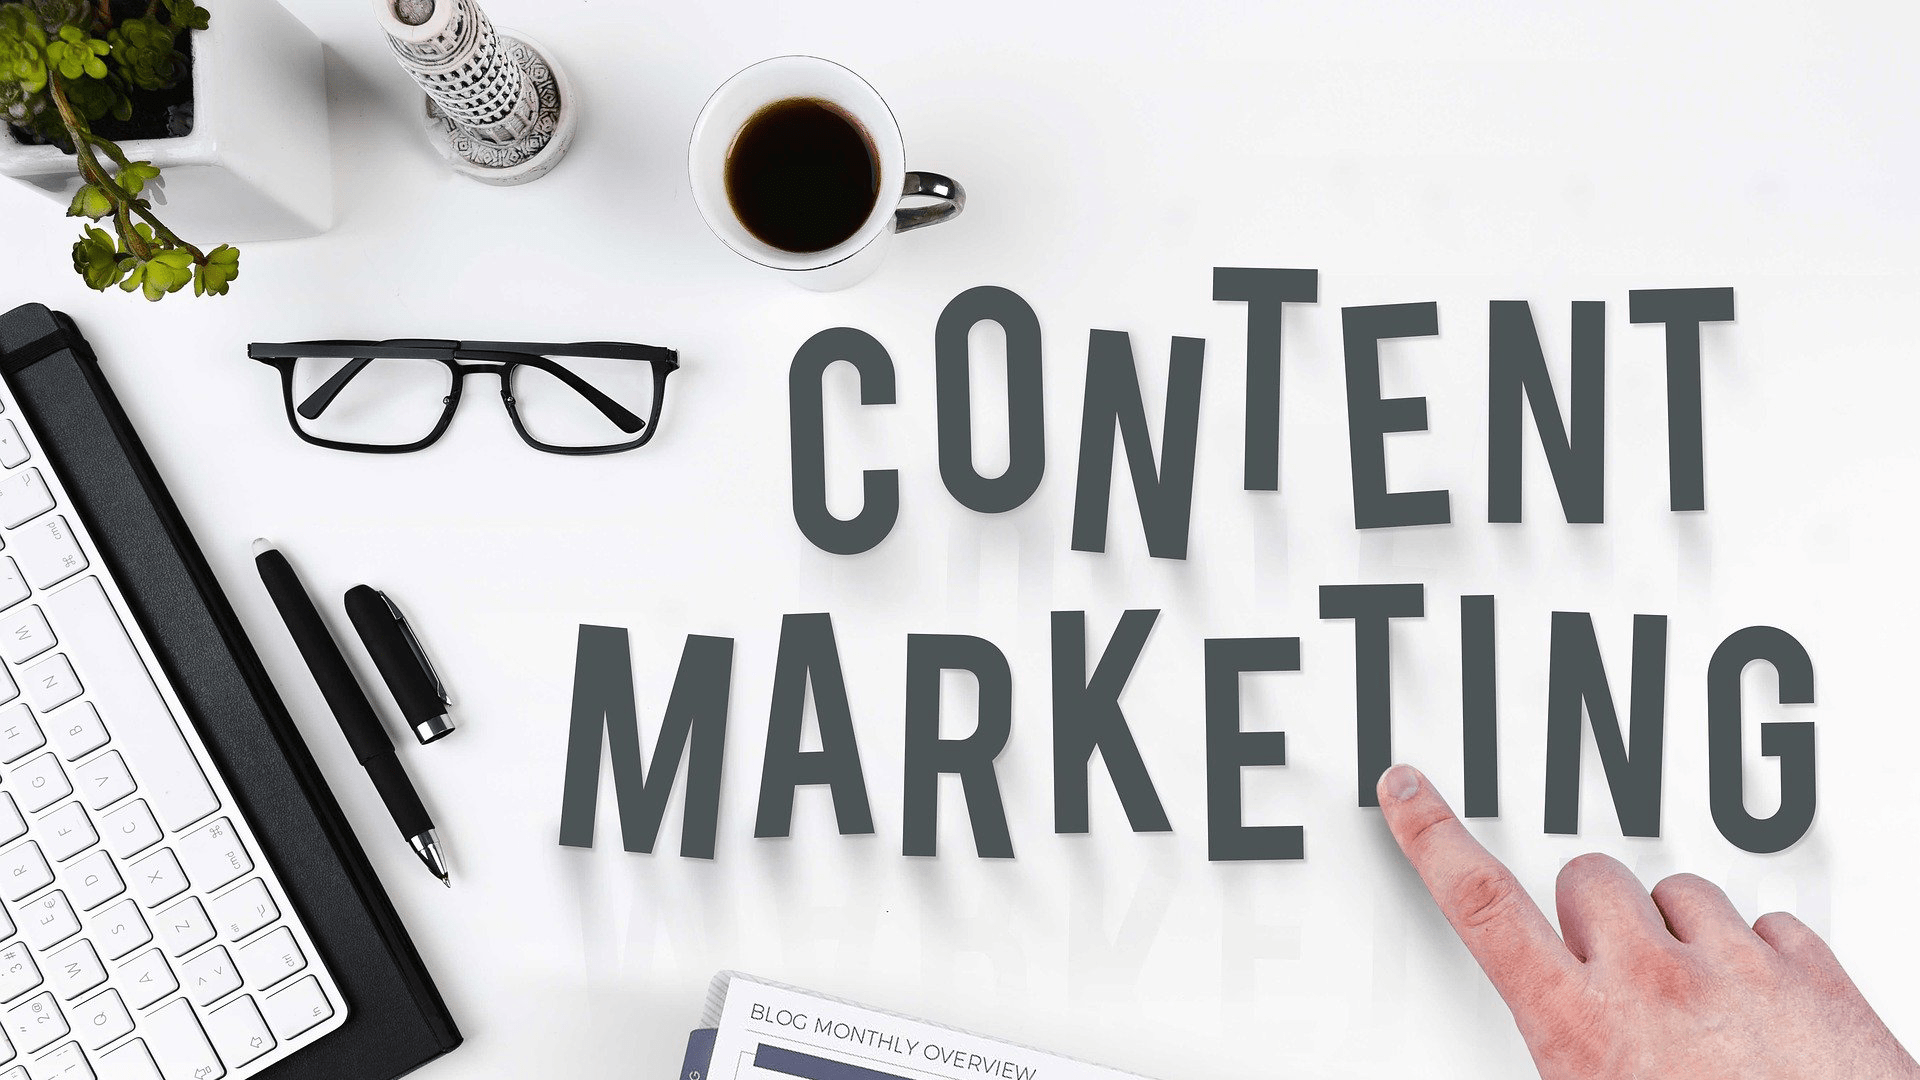 Content Marketing Takes Time